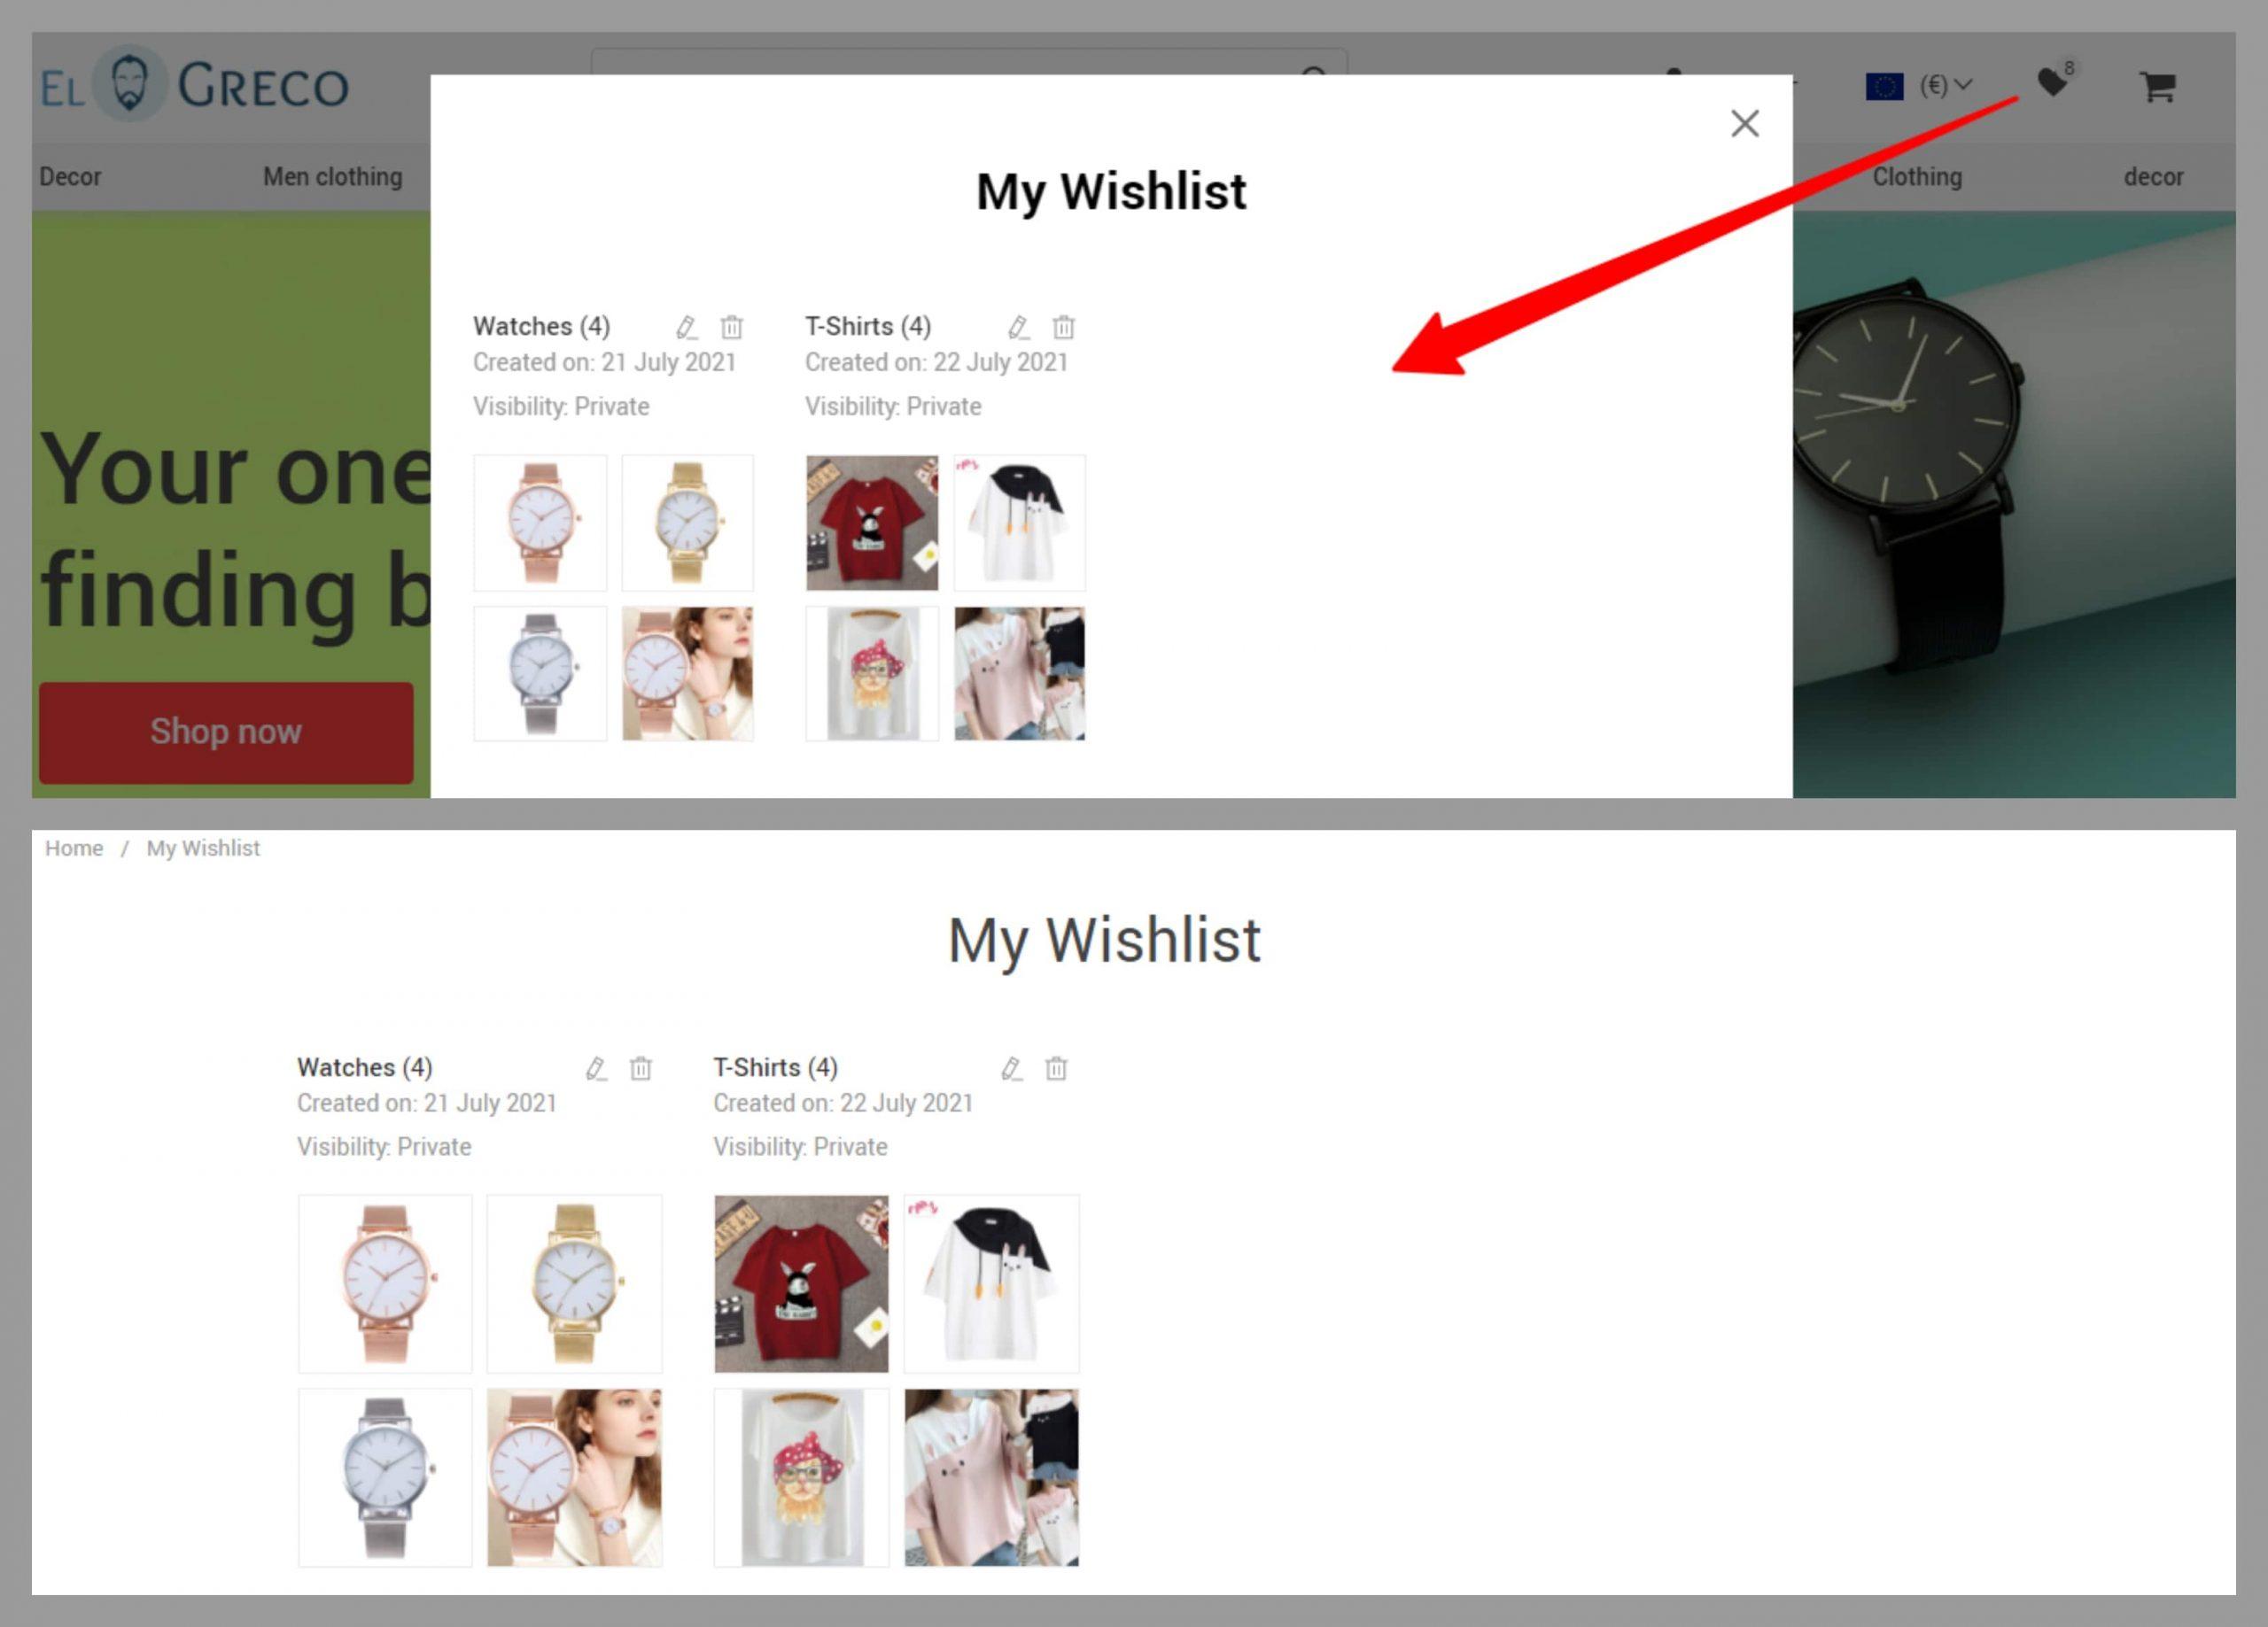 Wish lists displayed as a pop-up window and as a separate page on an online store.